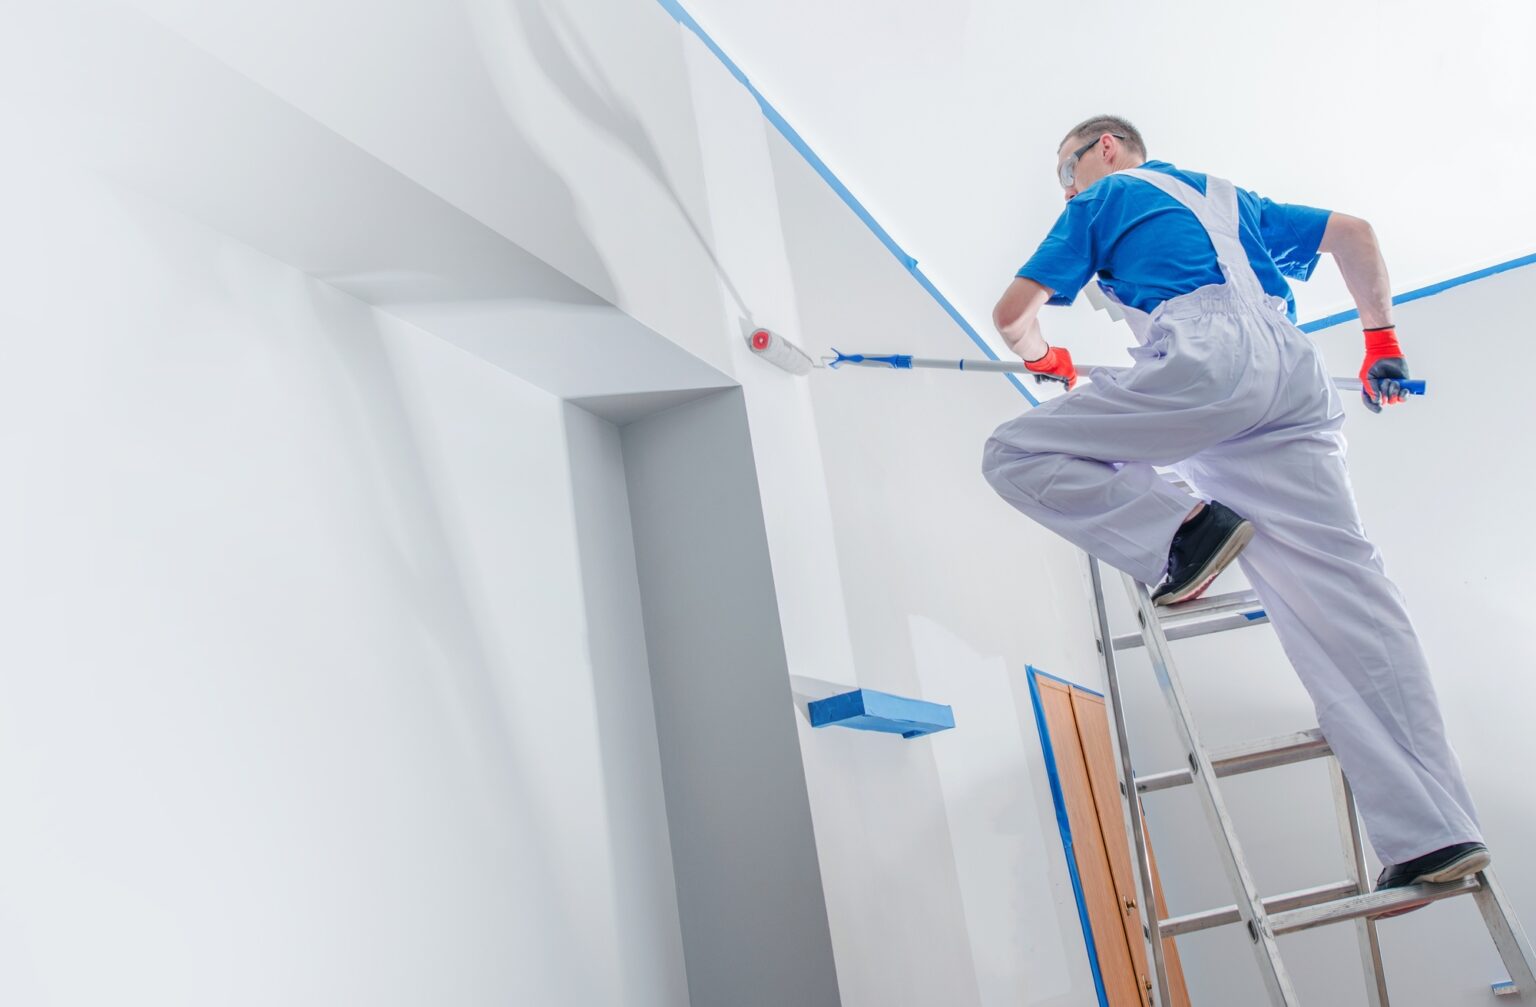 5 Key Qualities to Look For In a Painting Contractor